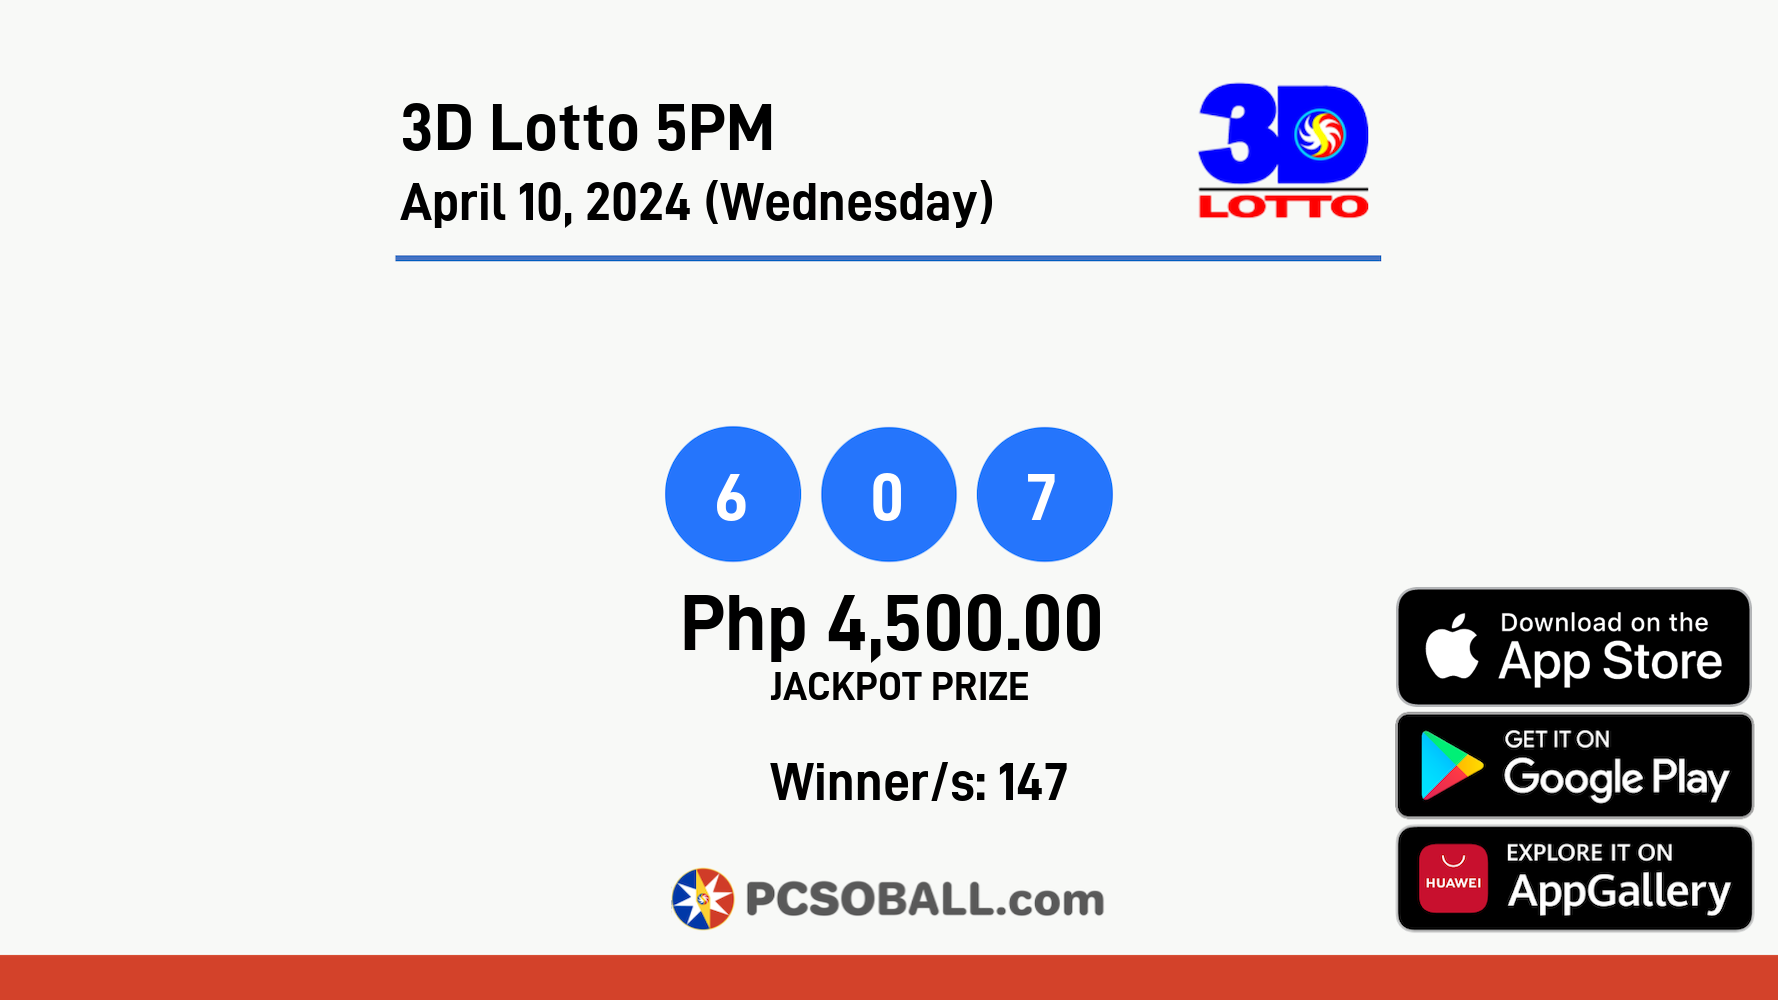 3D Lotto 5PM April 10, 2024 (Wednesday) Result